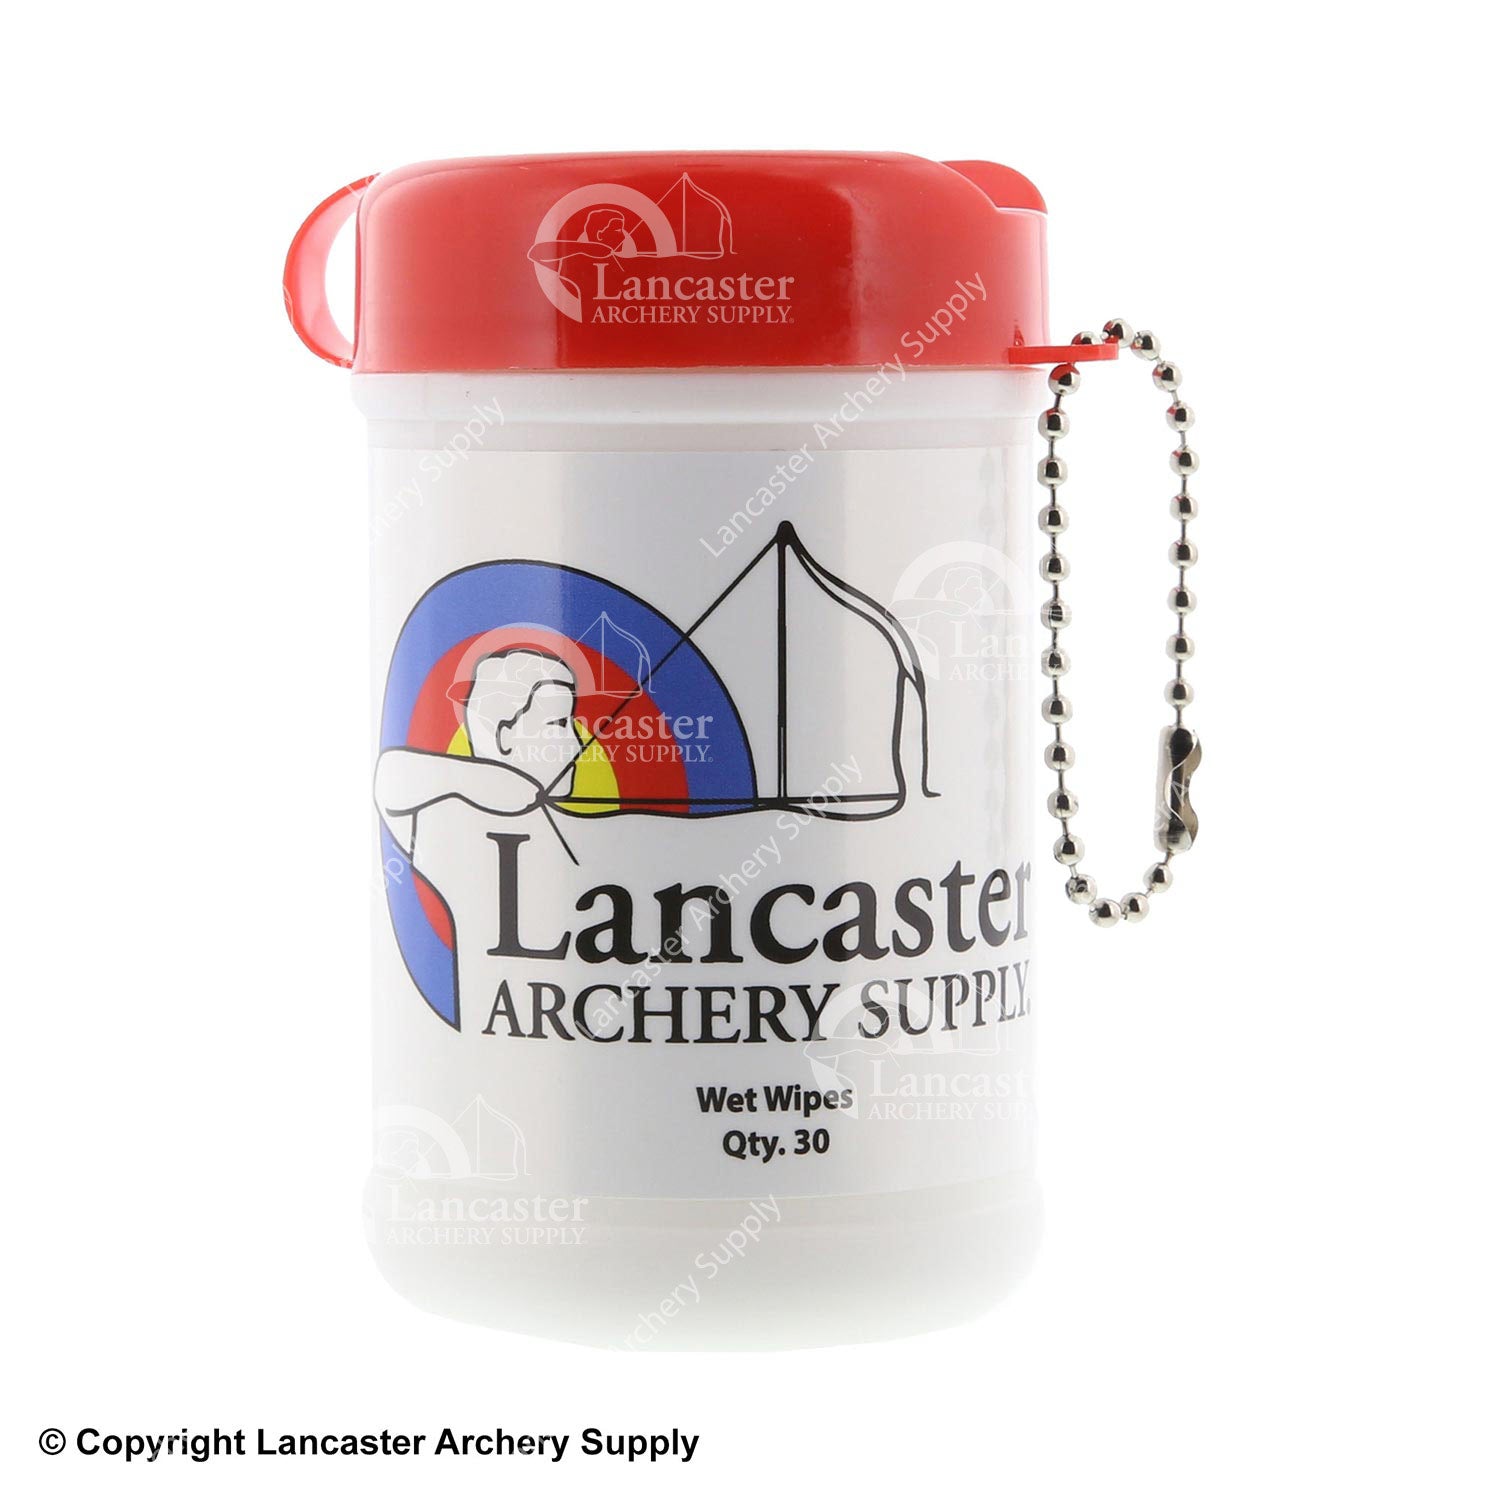 Lancaster Archery Supply Wet Wipes Canister